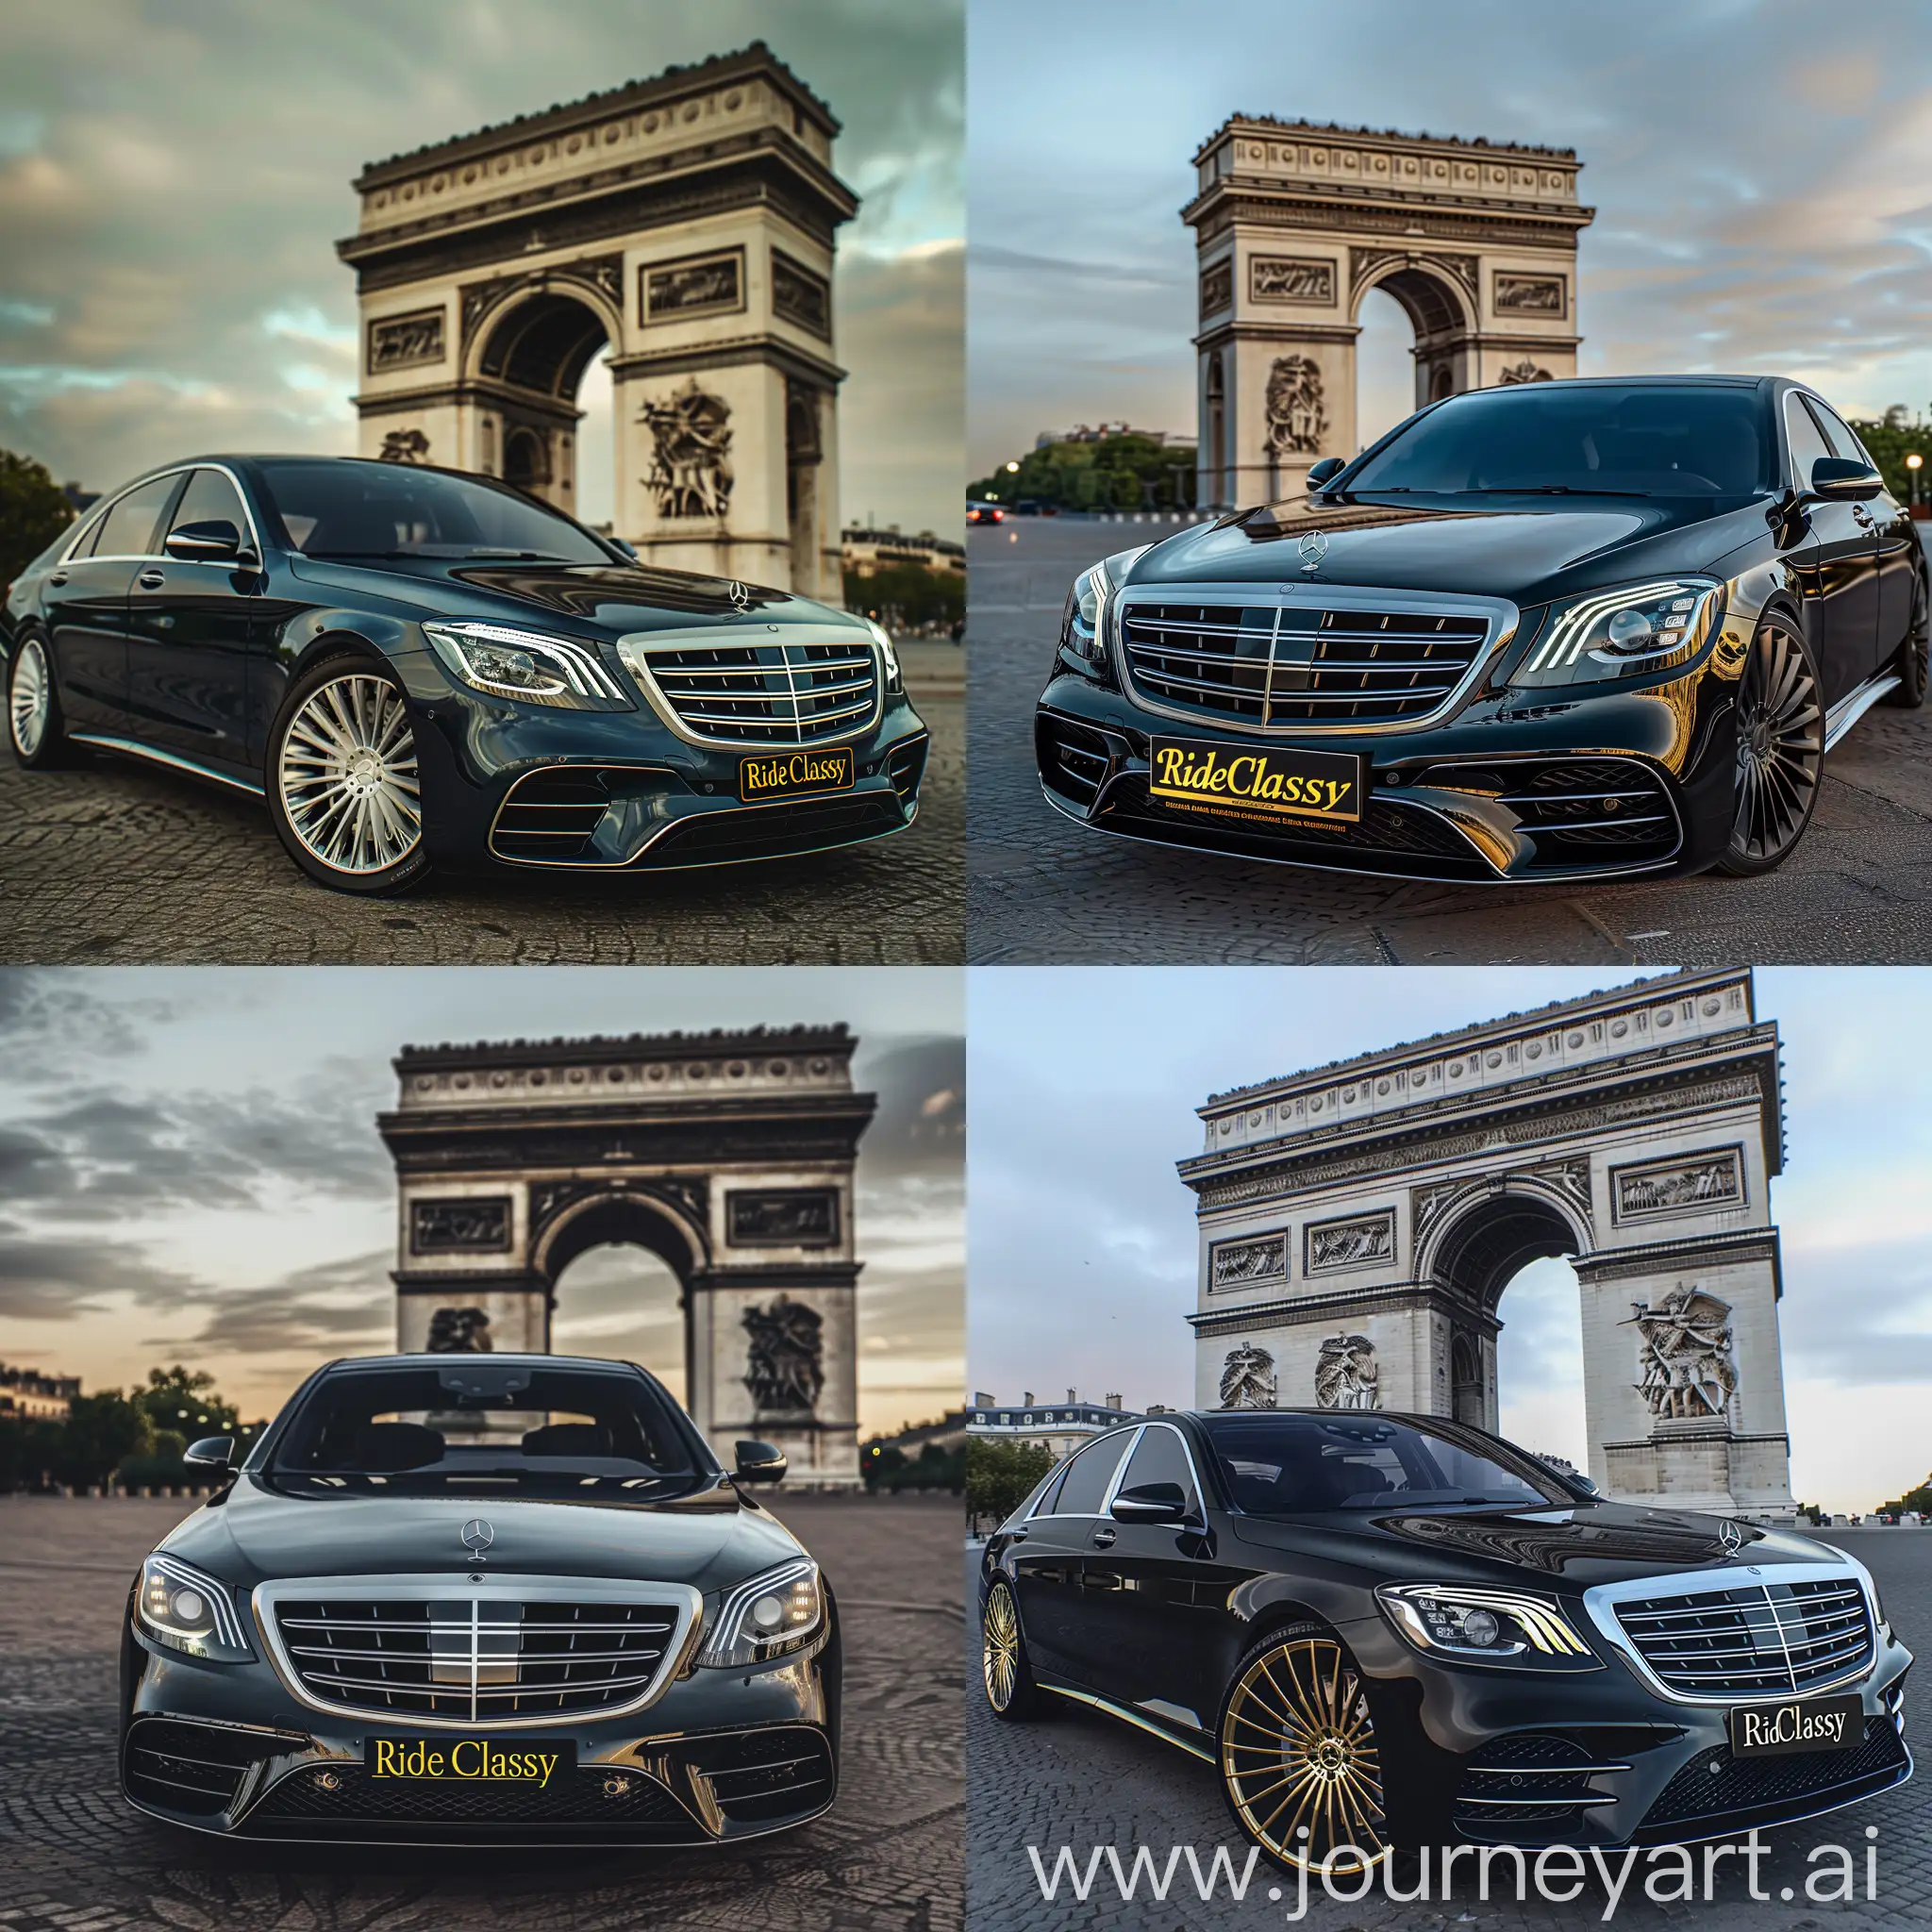 Photorealistic 4K image or a Black S-Class parked in front of Arc de Triomf, the S-Class should the Number plate: “RideClassy” in gold preferably 